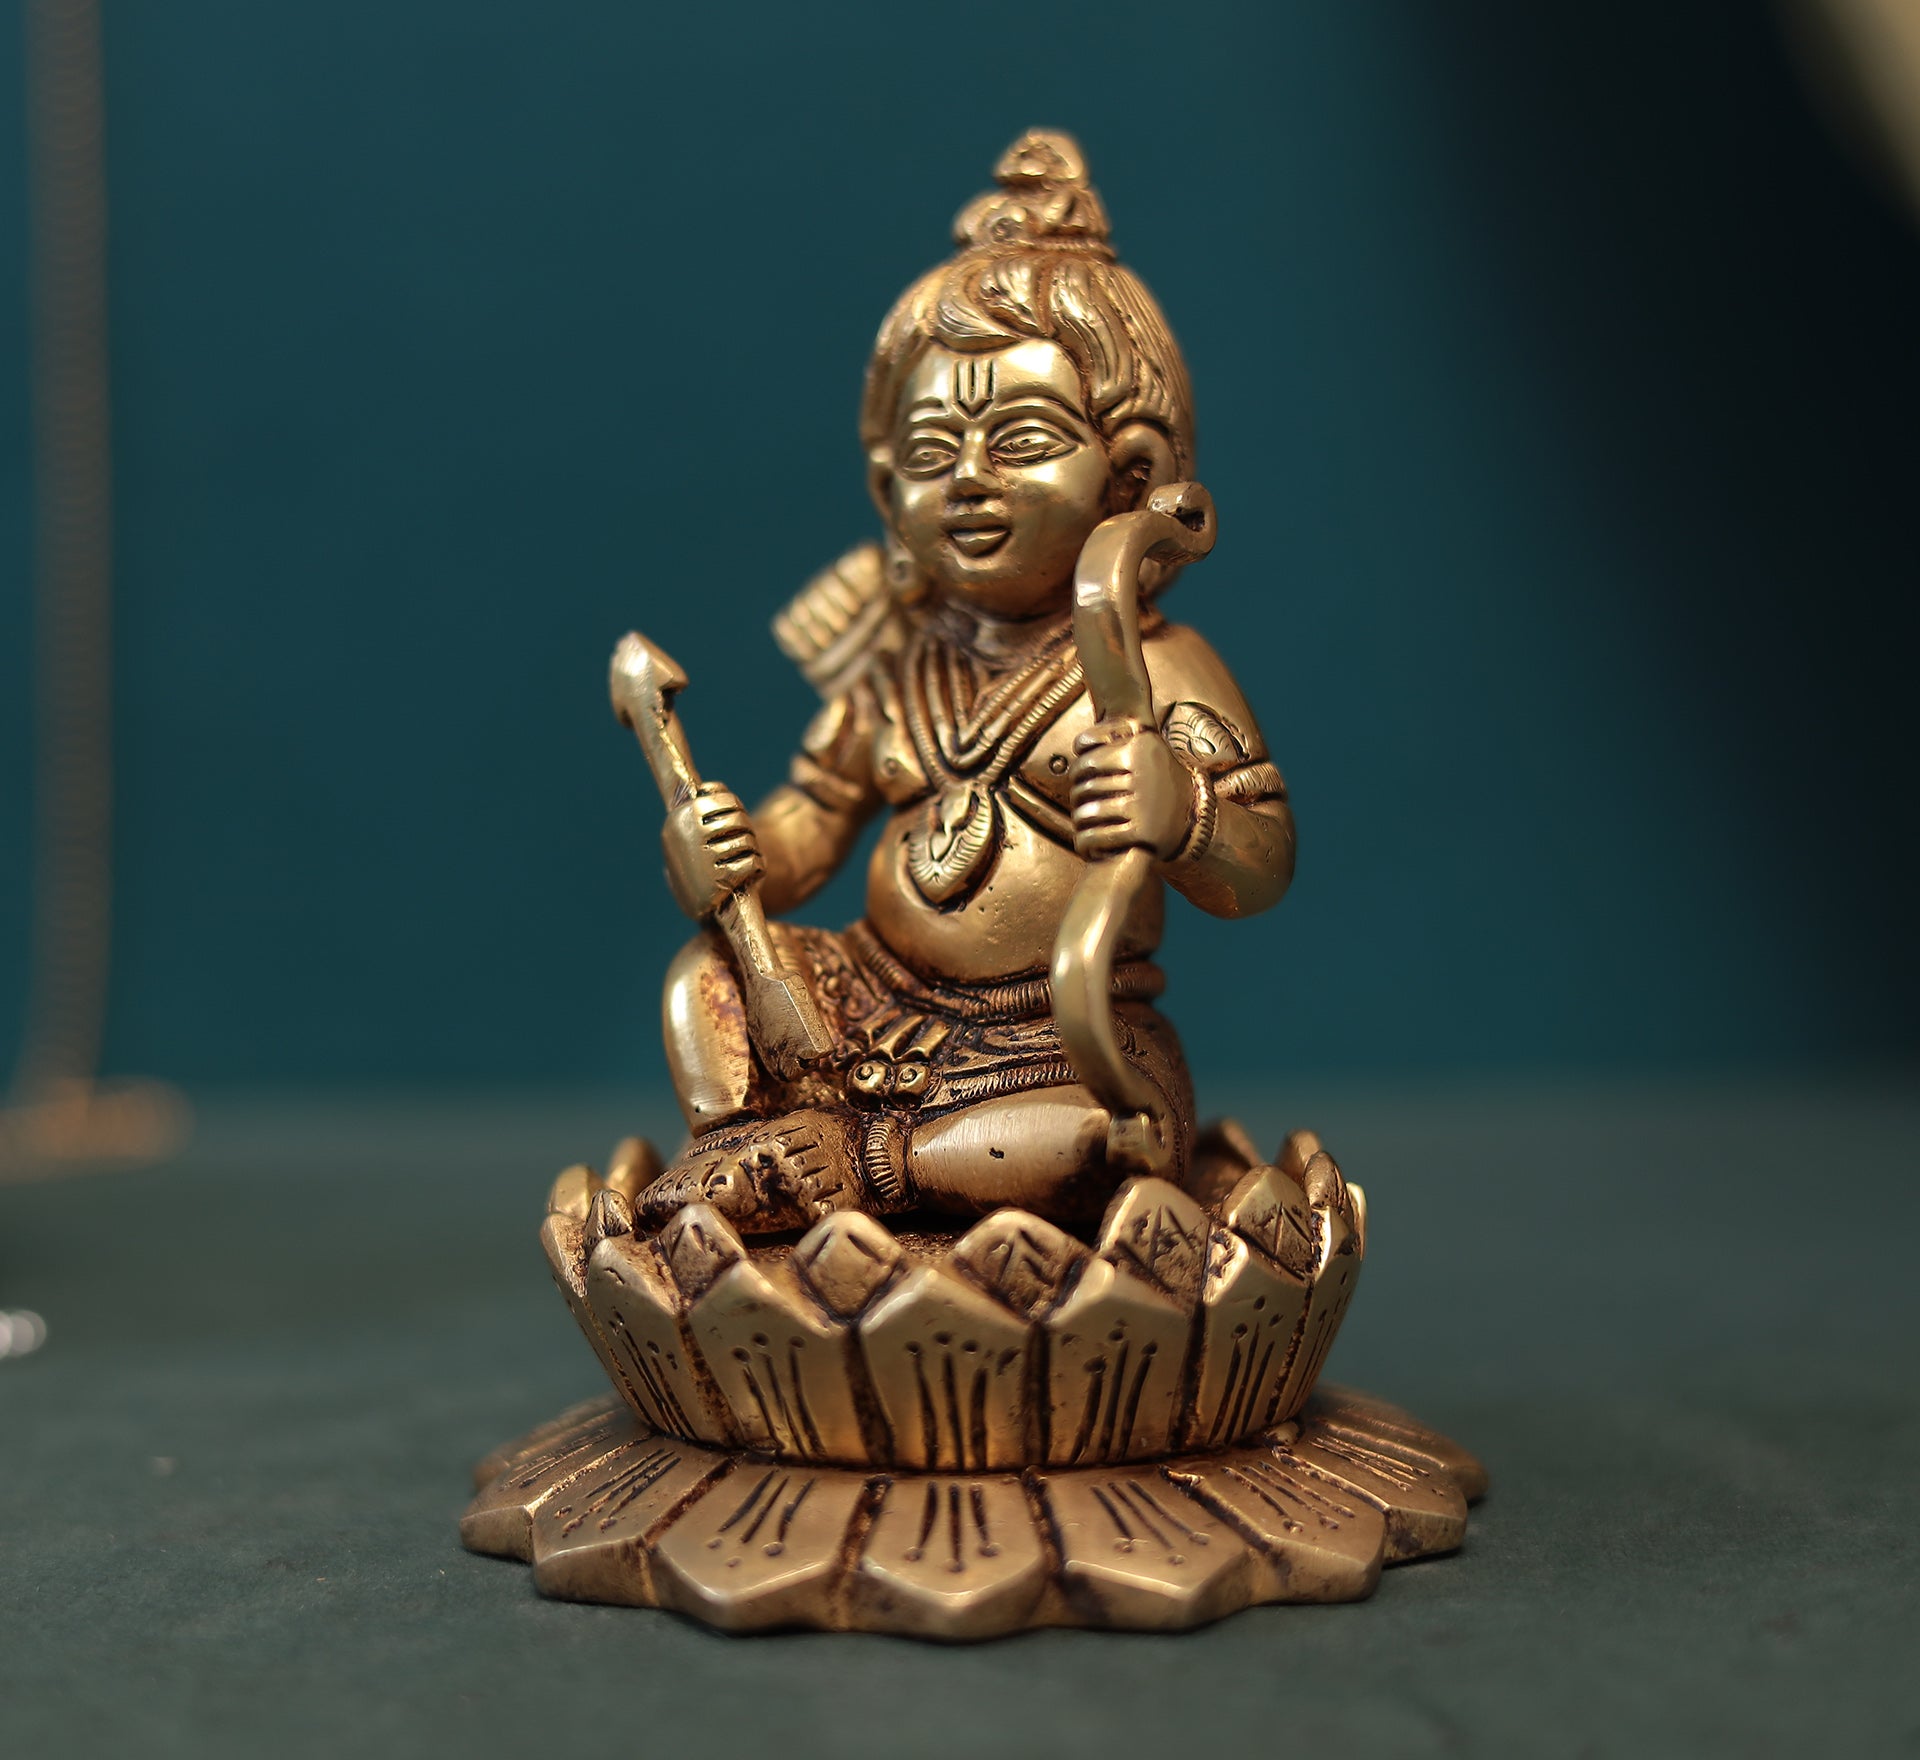 Superfine Brass Bal Ram Lalla Seated On Lotus In 5 Inches (12.7 Cm)